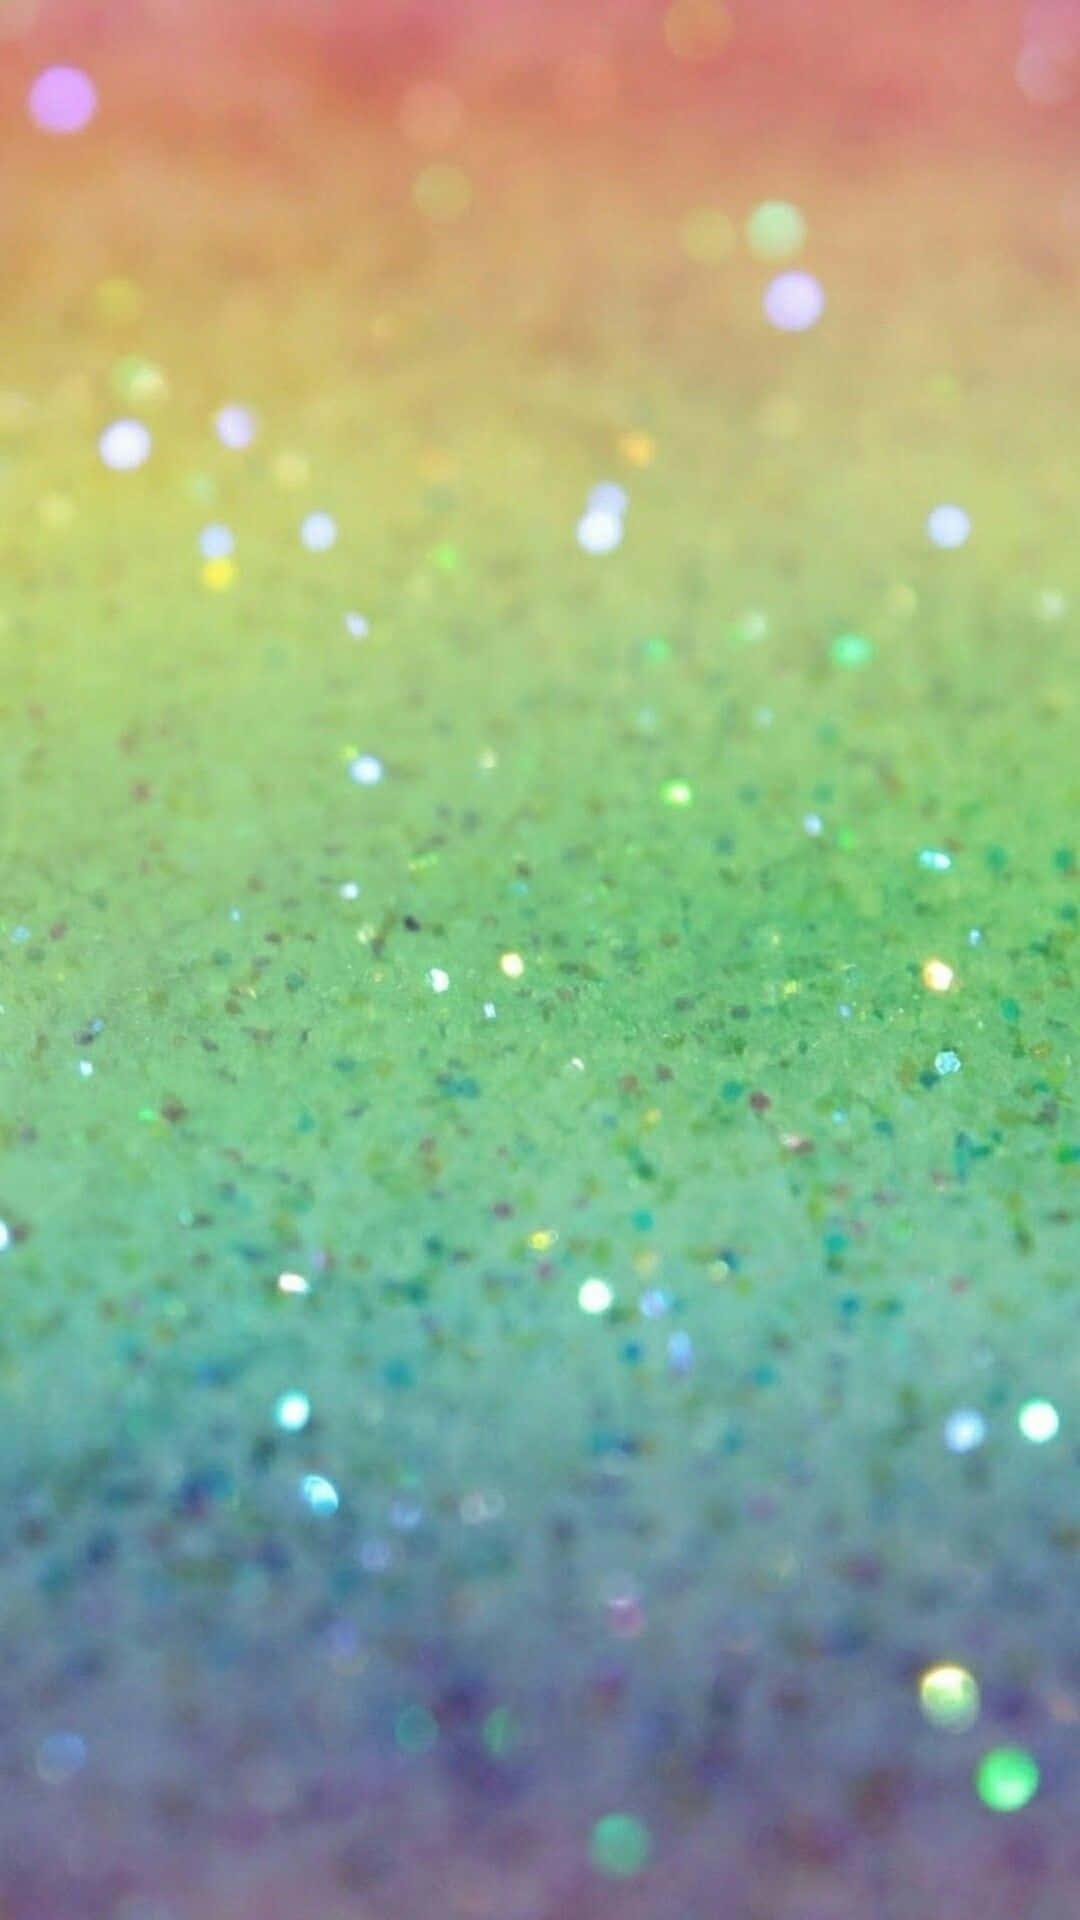 An eye-catching background of bright and vibrant sparkles